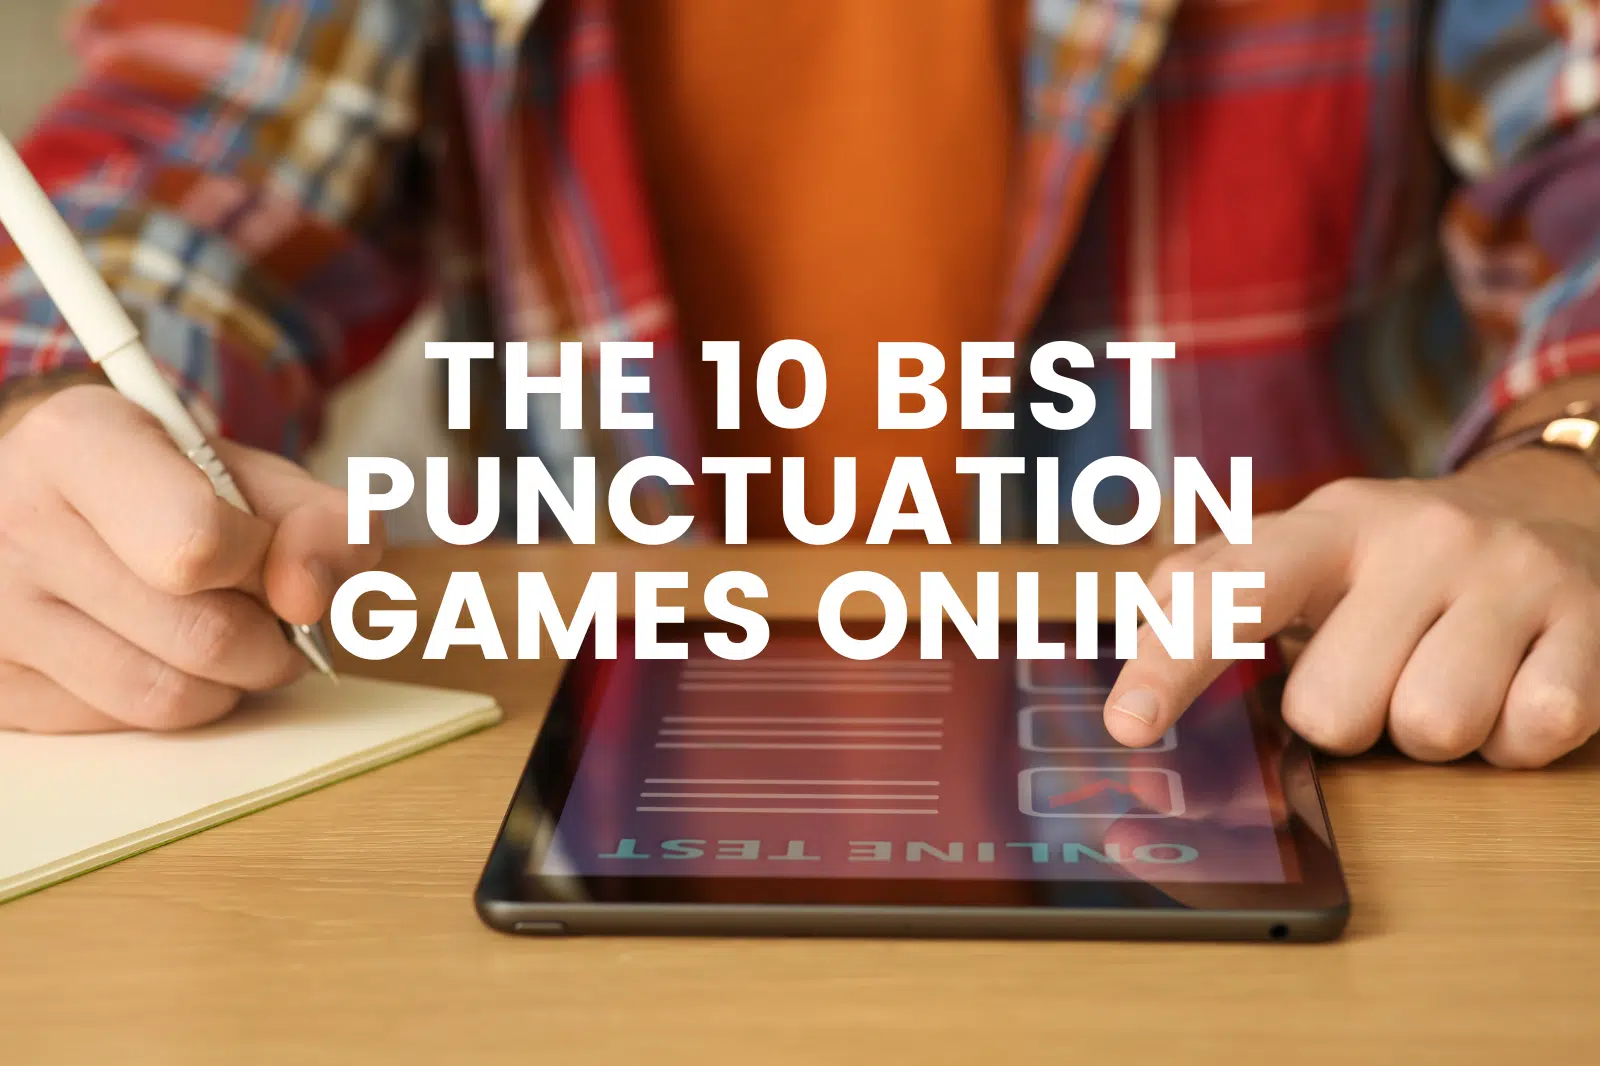 The 10 Best Punctuation Games Online